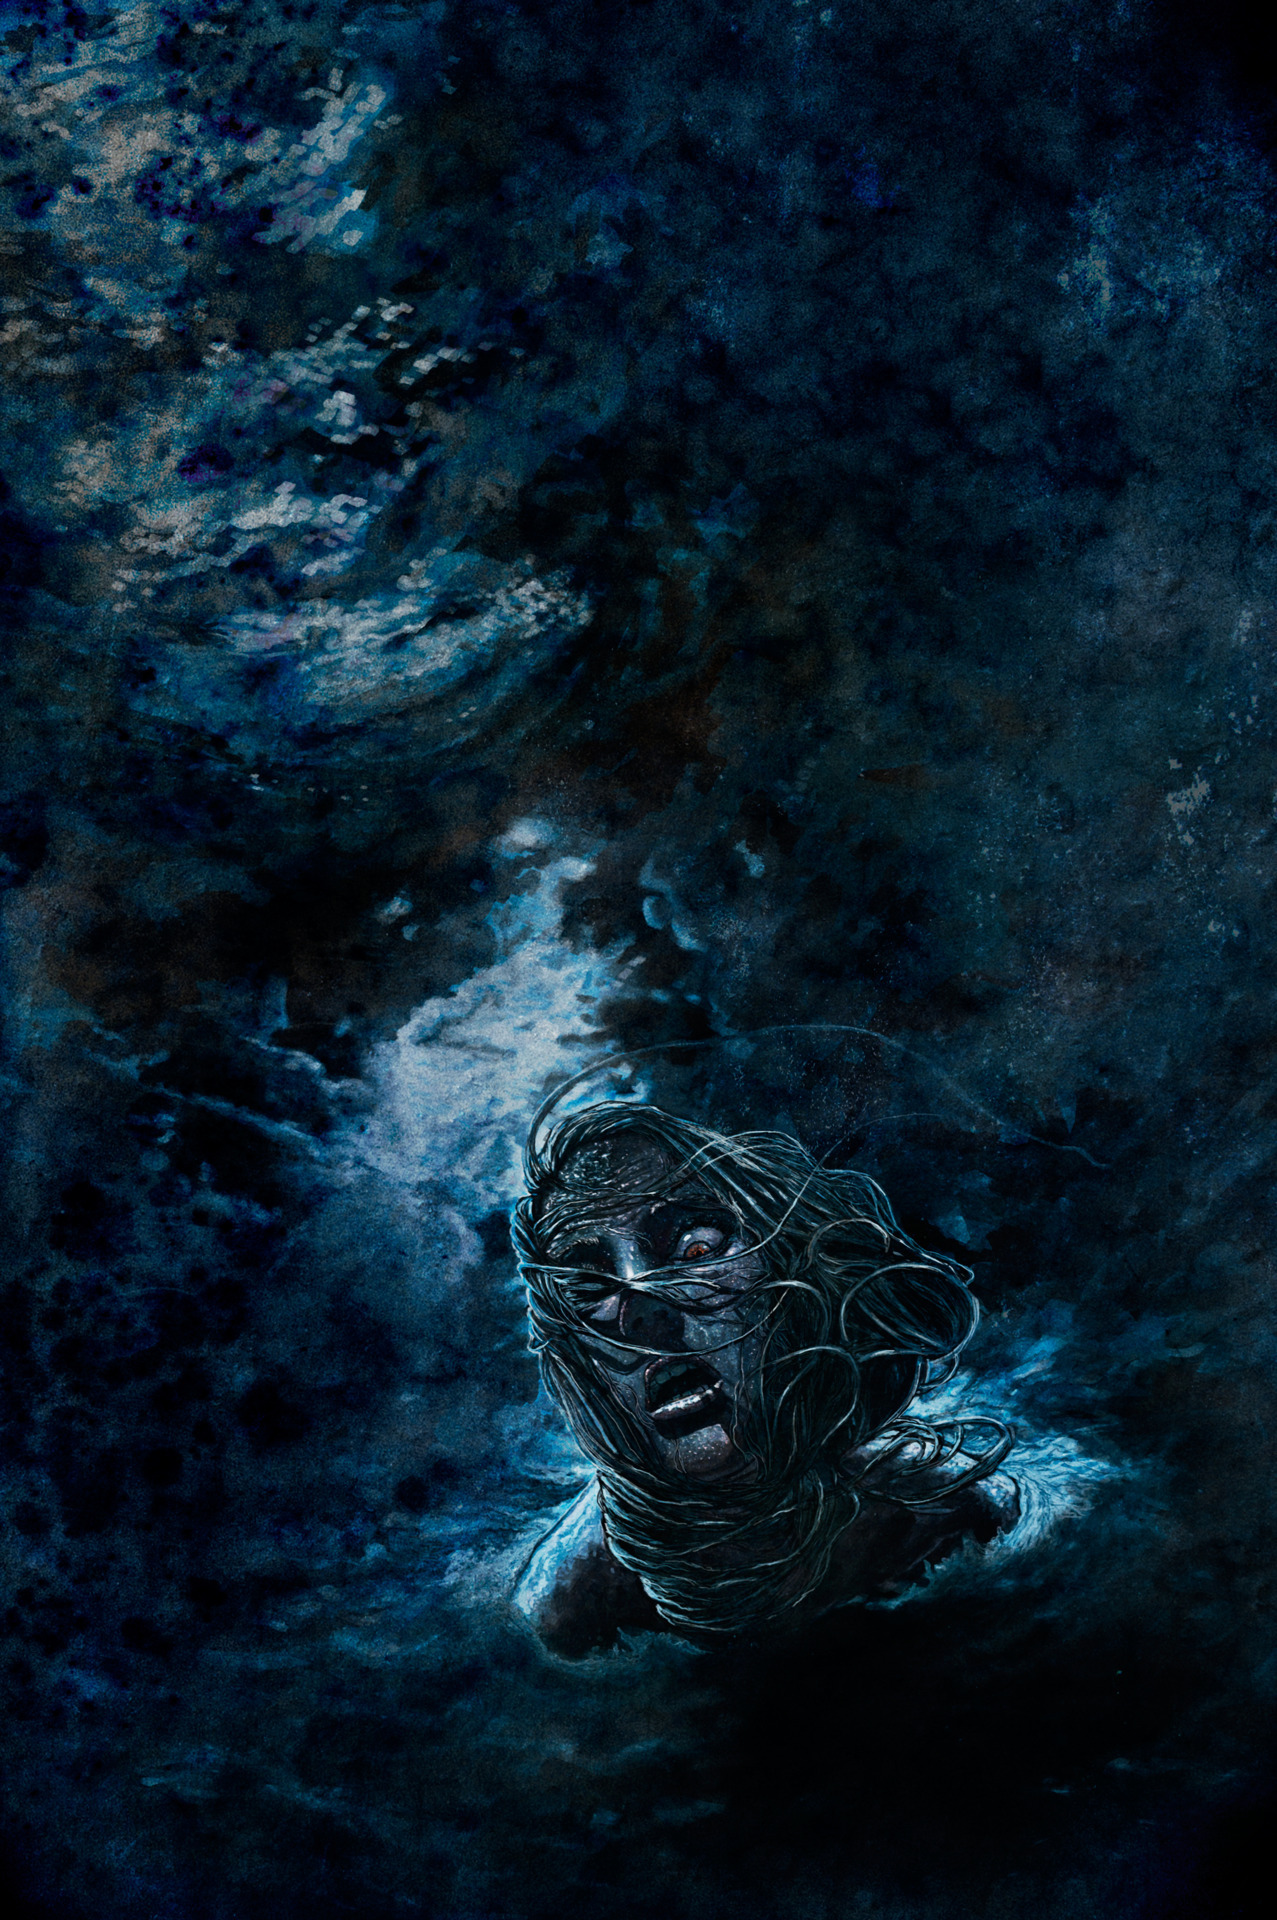 The final for my Fantasy illustration. The assignment was horror. I chose the horror of open water at night with no land in sight. Hope you like it! http://www.facebook.com/pages/Matthew-Trupia-Art/242174825793556 http://www.silentinjection.deviantart.com